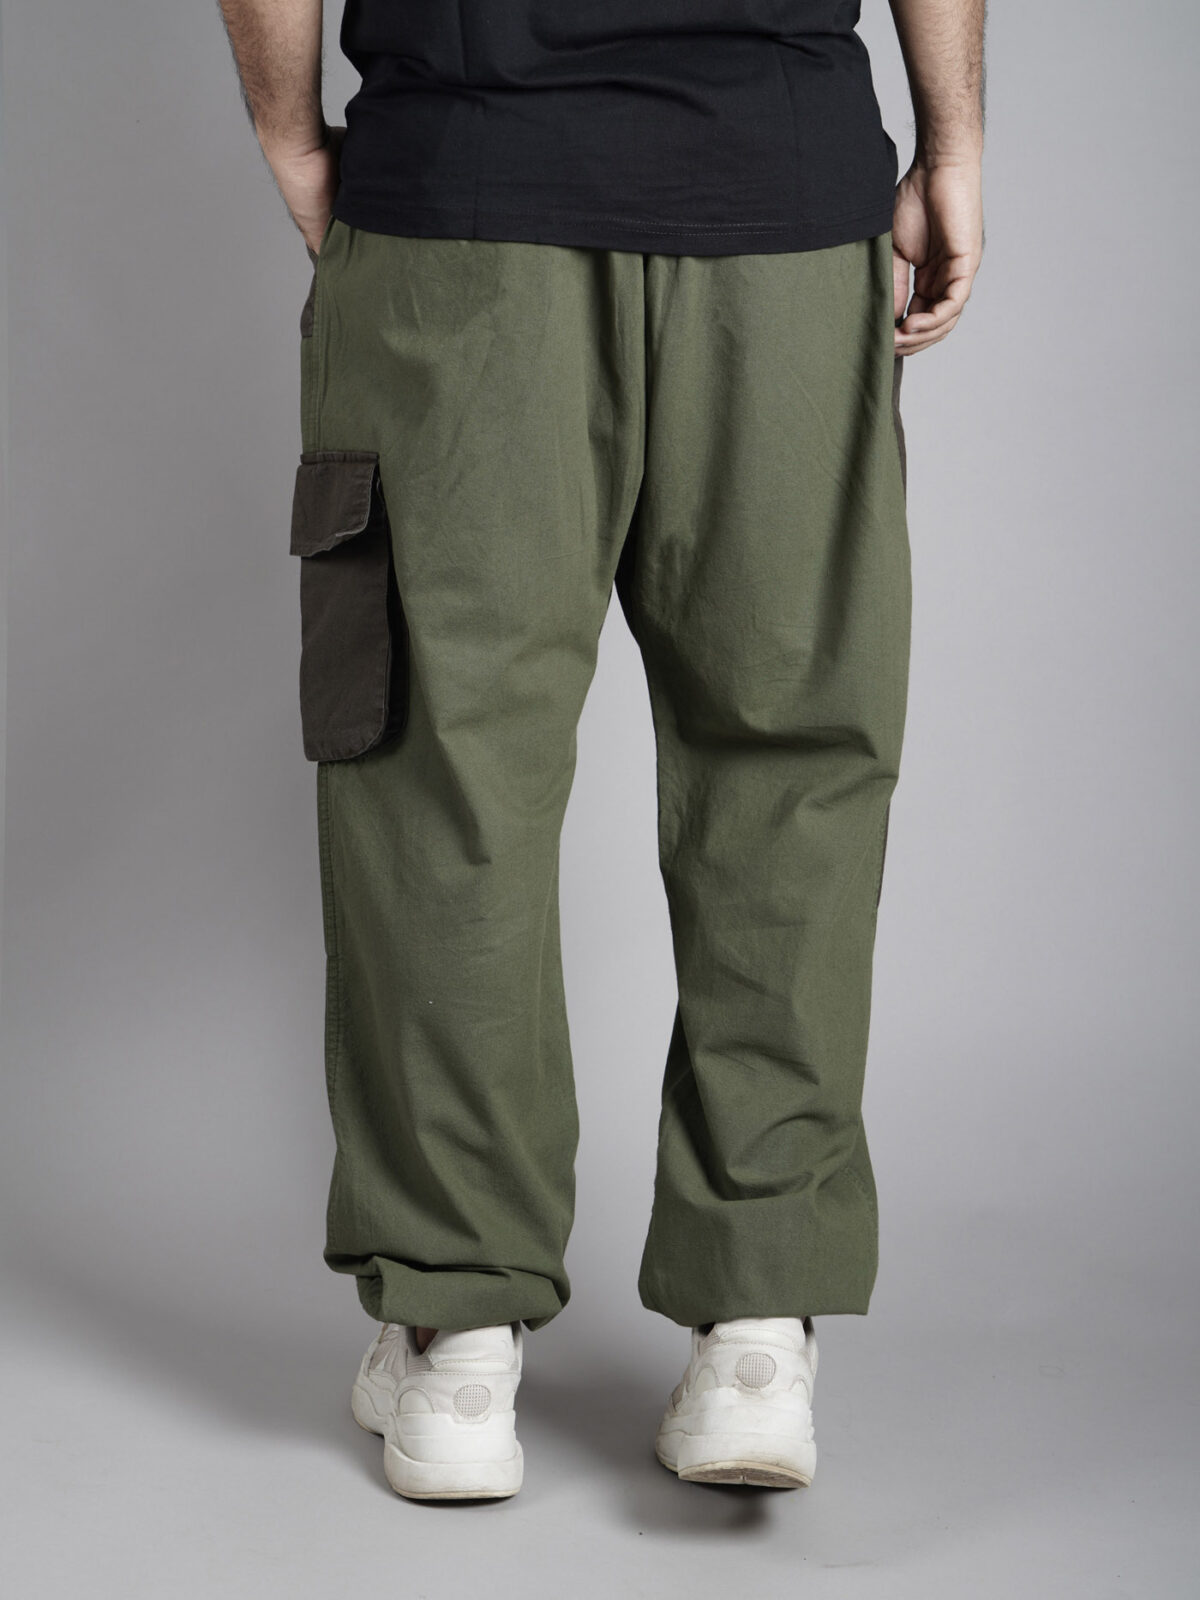 Duo Olive Brown Earthy Hoppers – Unisex Pants For Men And Women ...